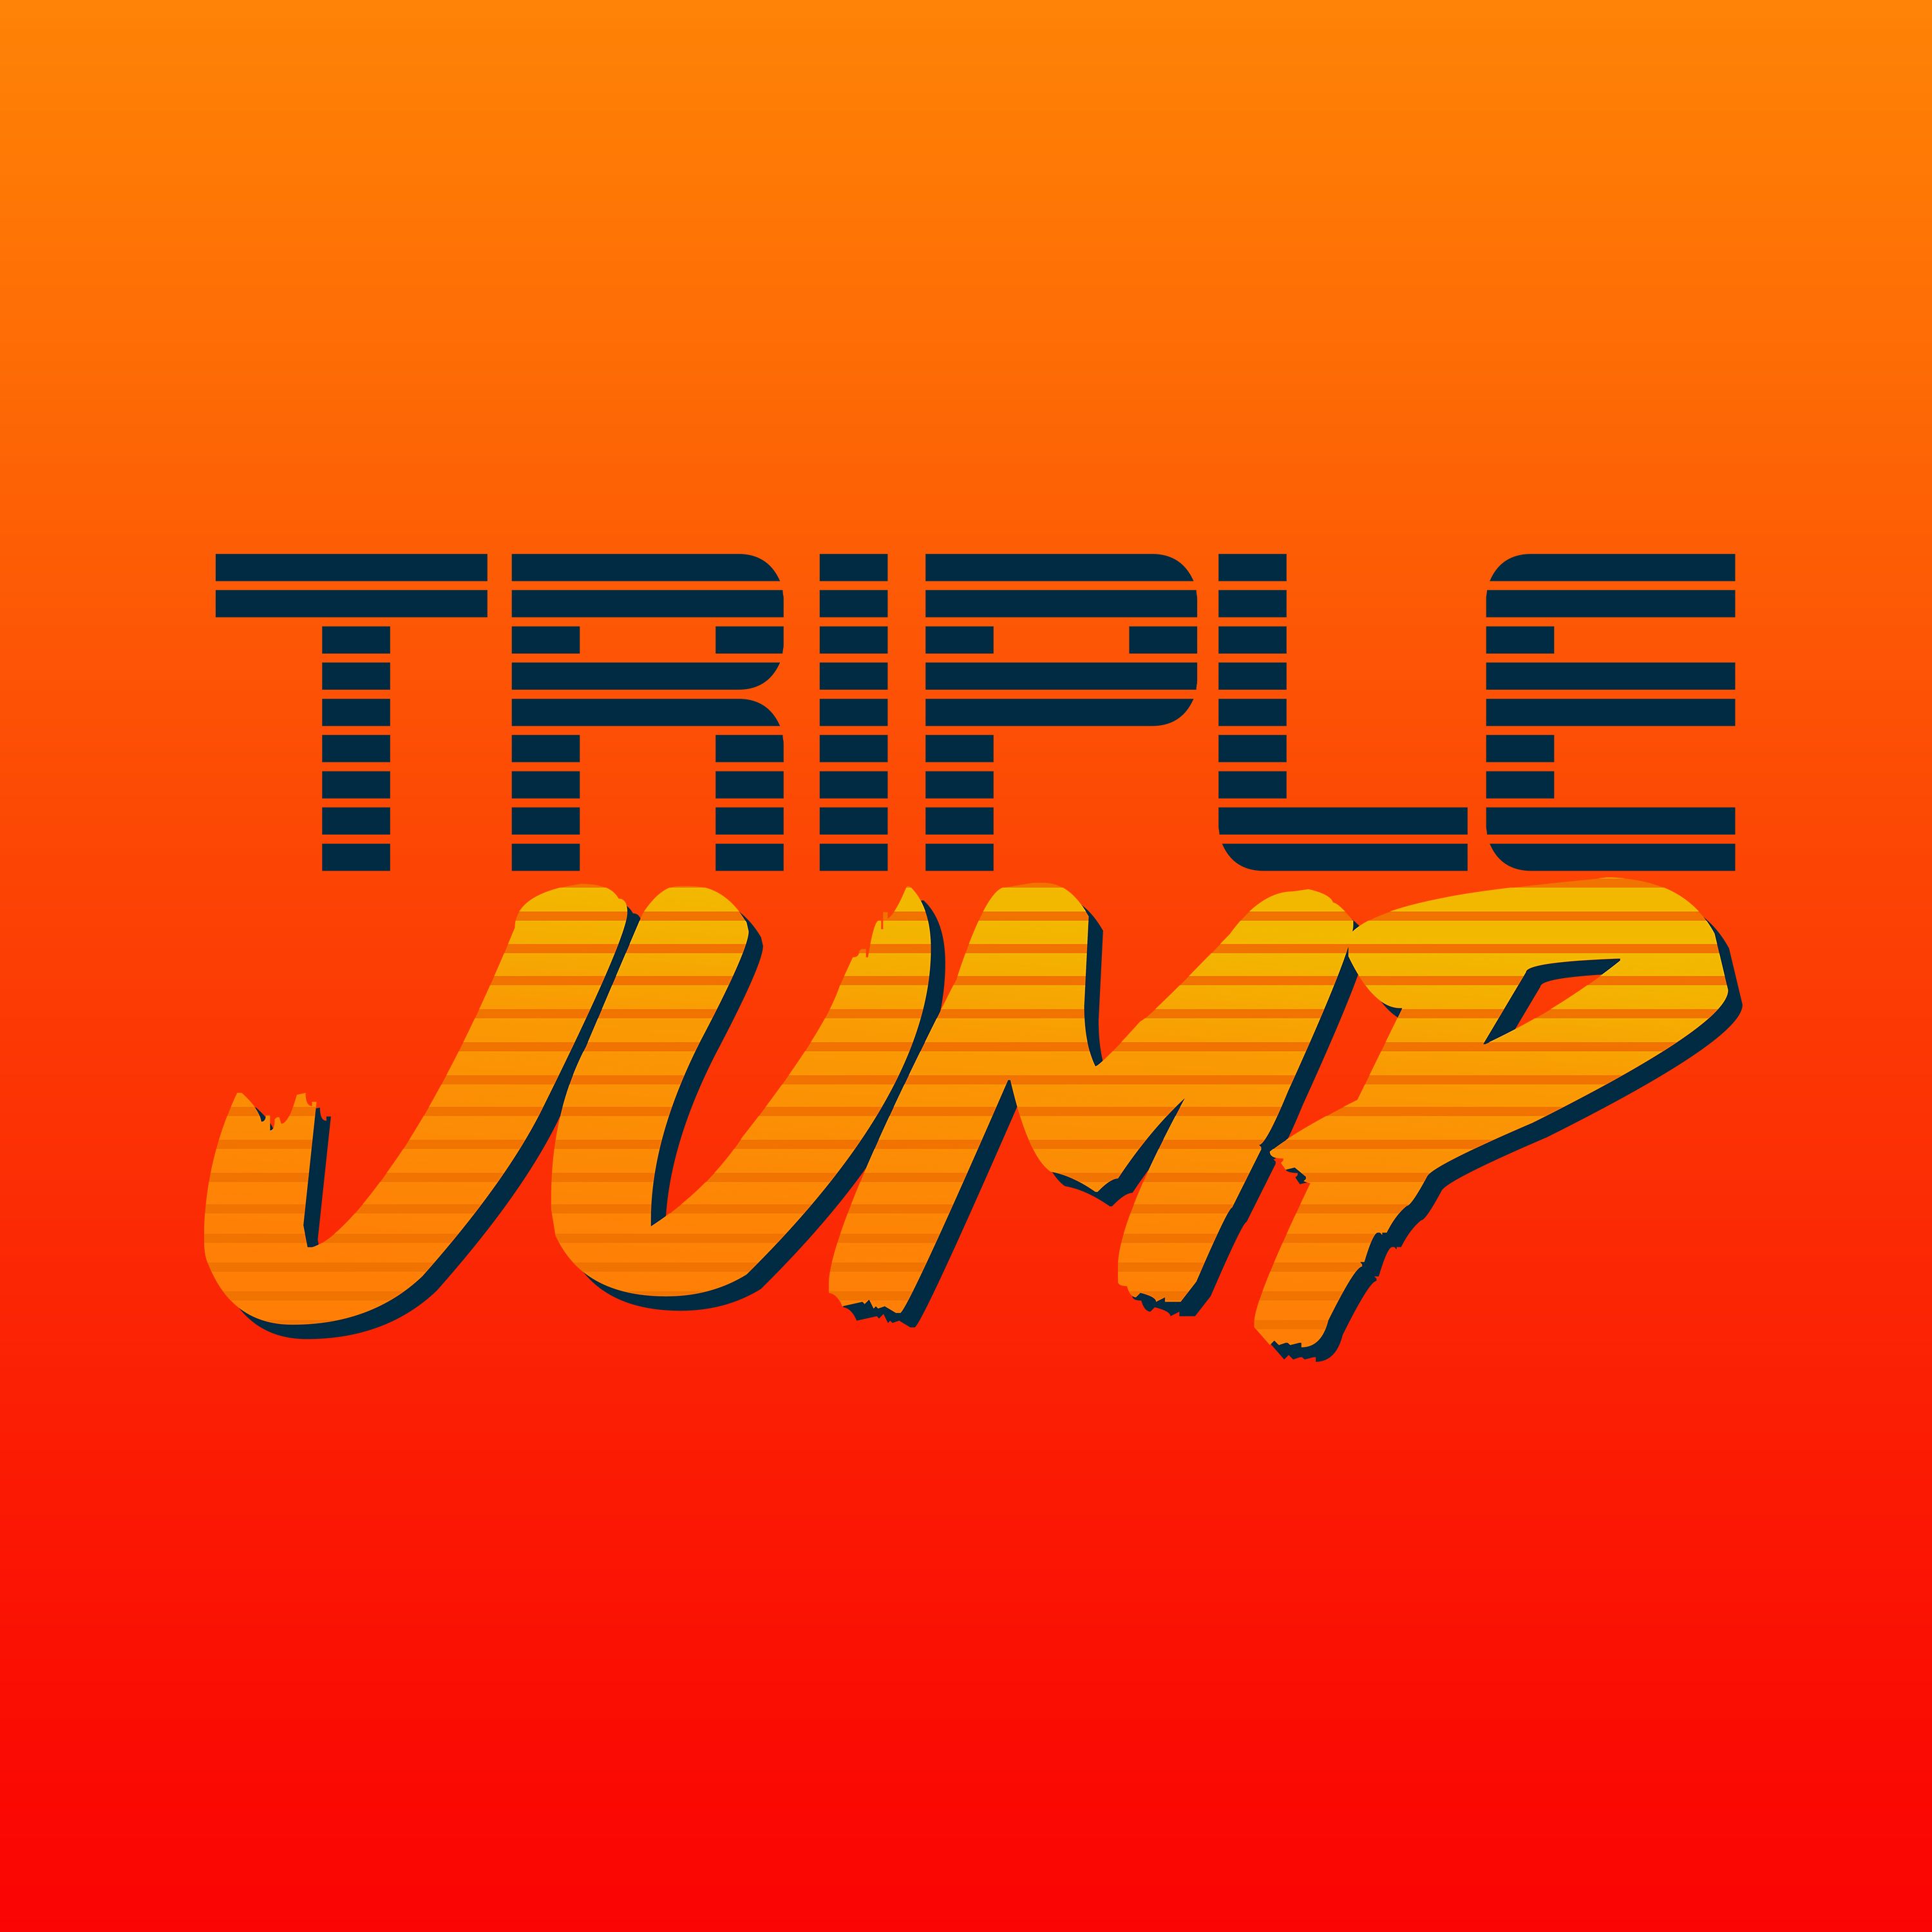 Triplejump Podcast 30 Gears 5 Can You Unlock Batista S Belly Button Tattoo The Triplejump Podcast Podcast Podtail - roblox buckingham palace leaked